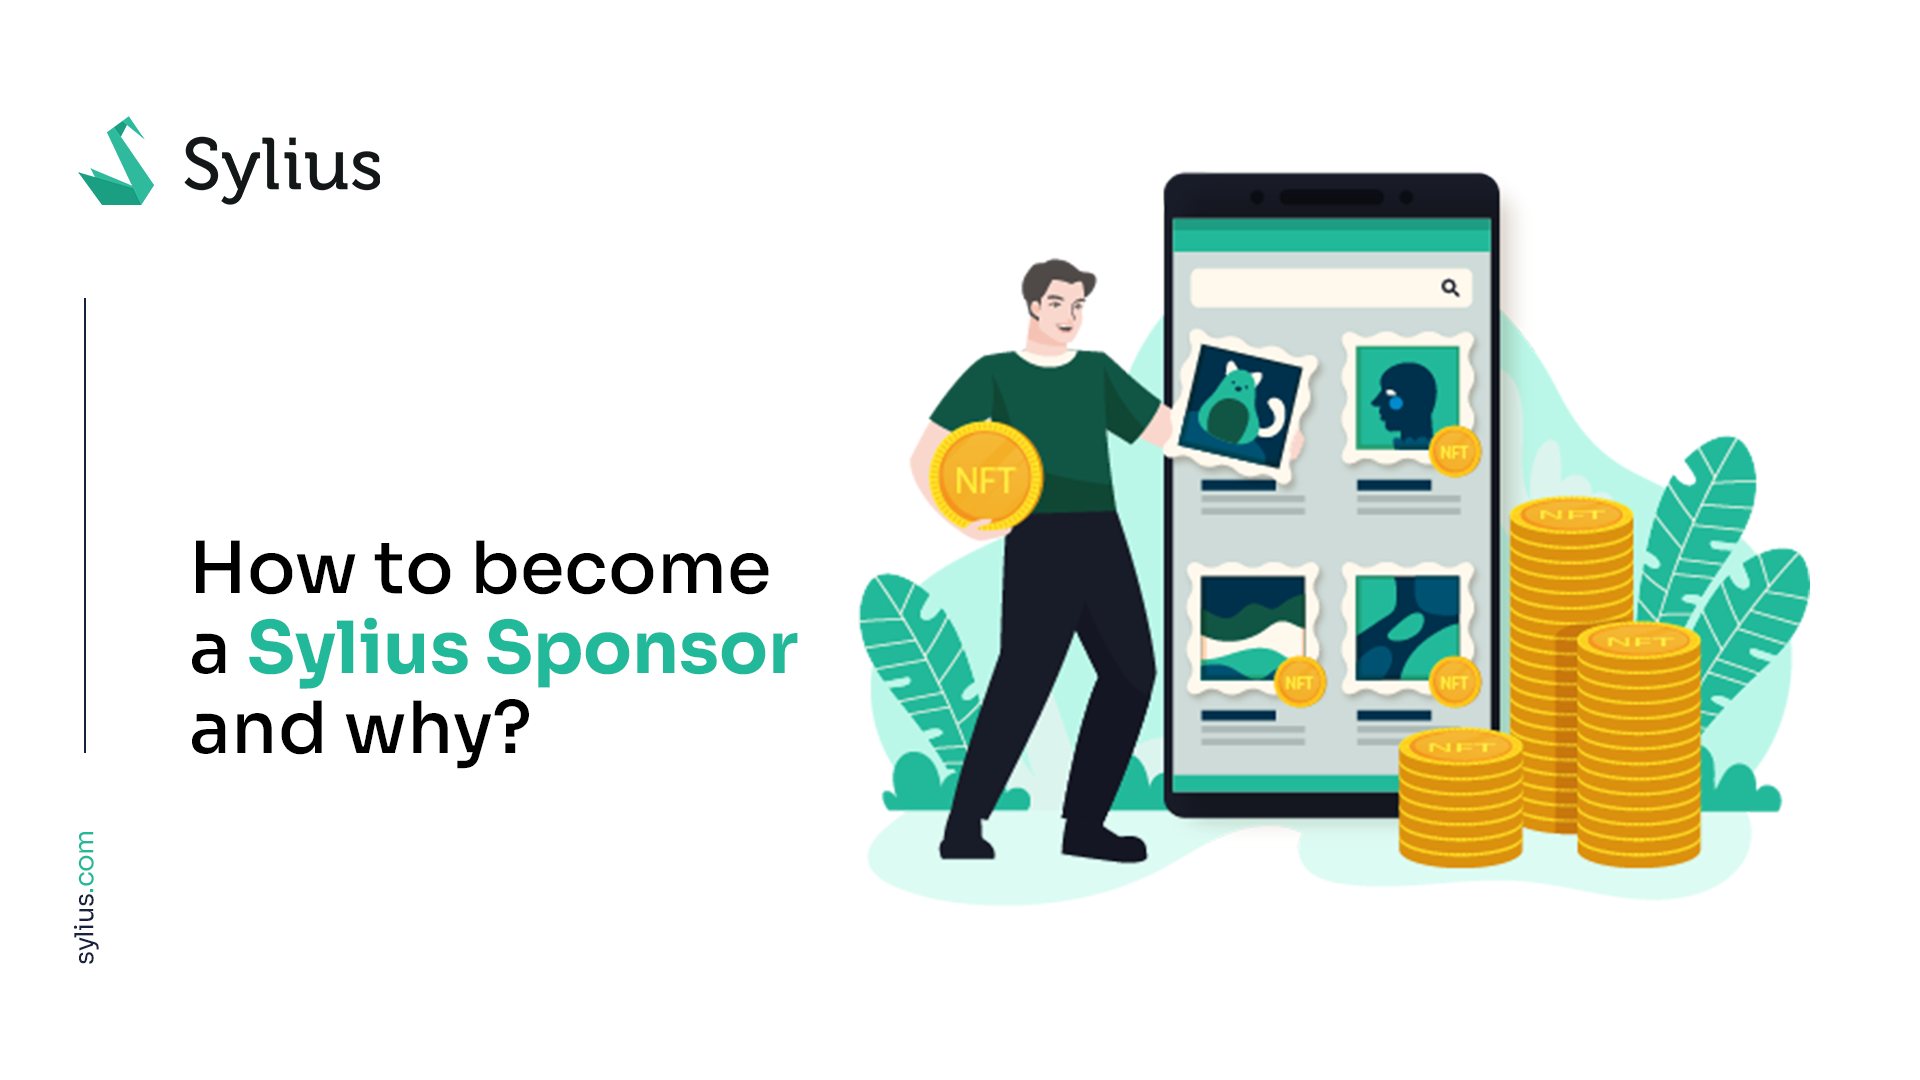 How to become a Sylius Sponsor and why?